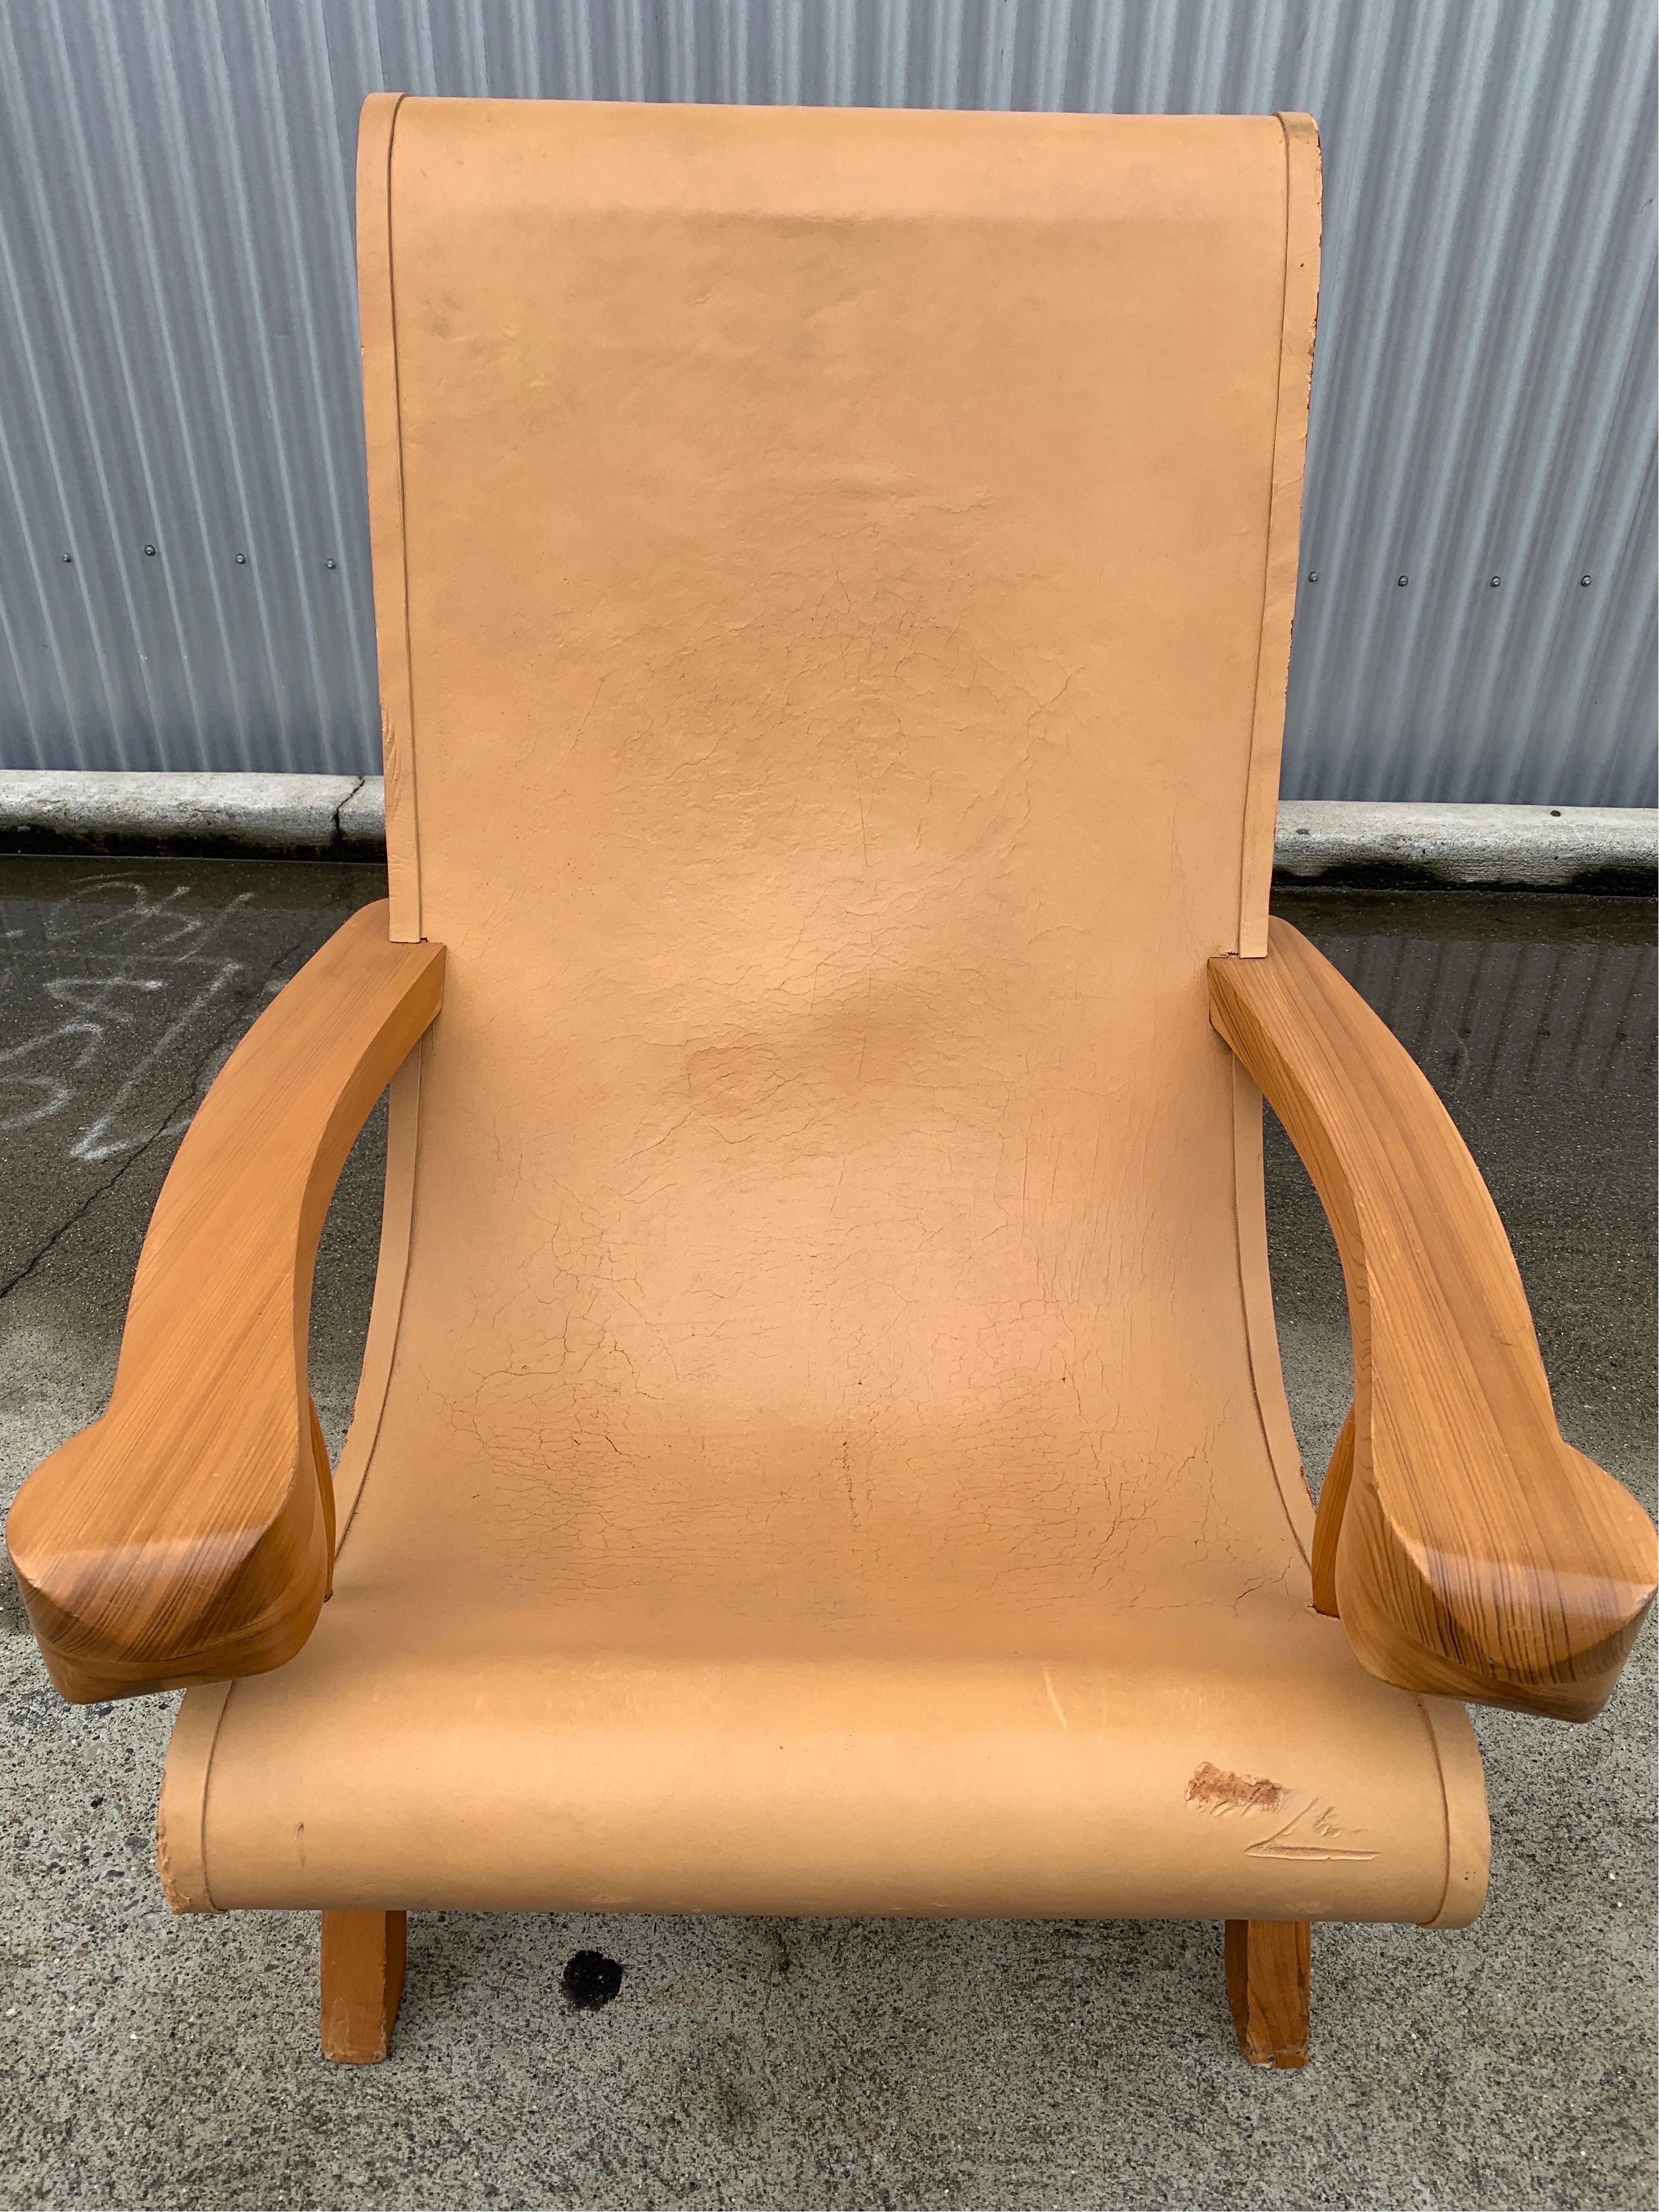 Clara Porset Lounge Chairs For Sale 9